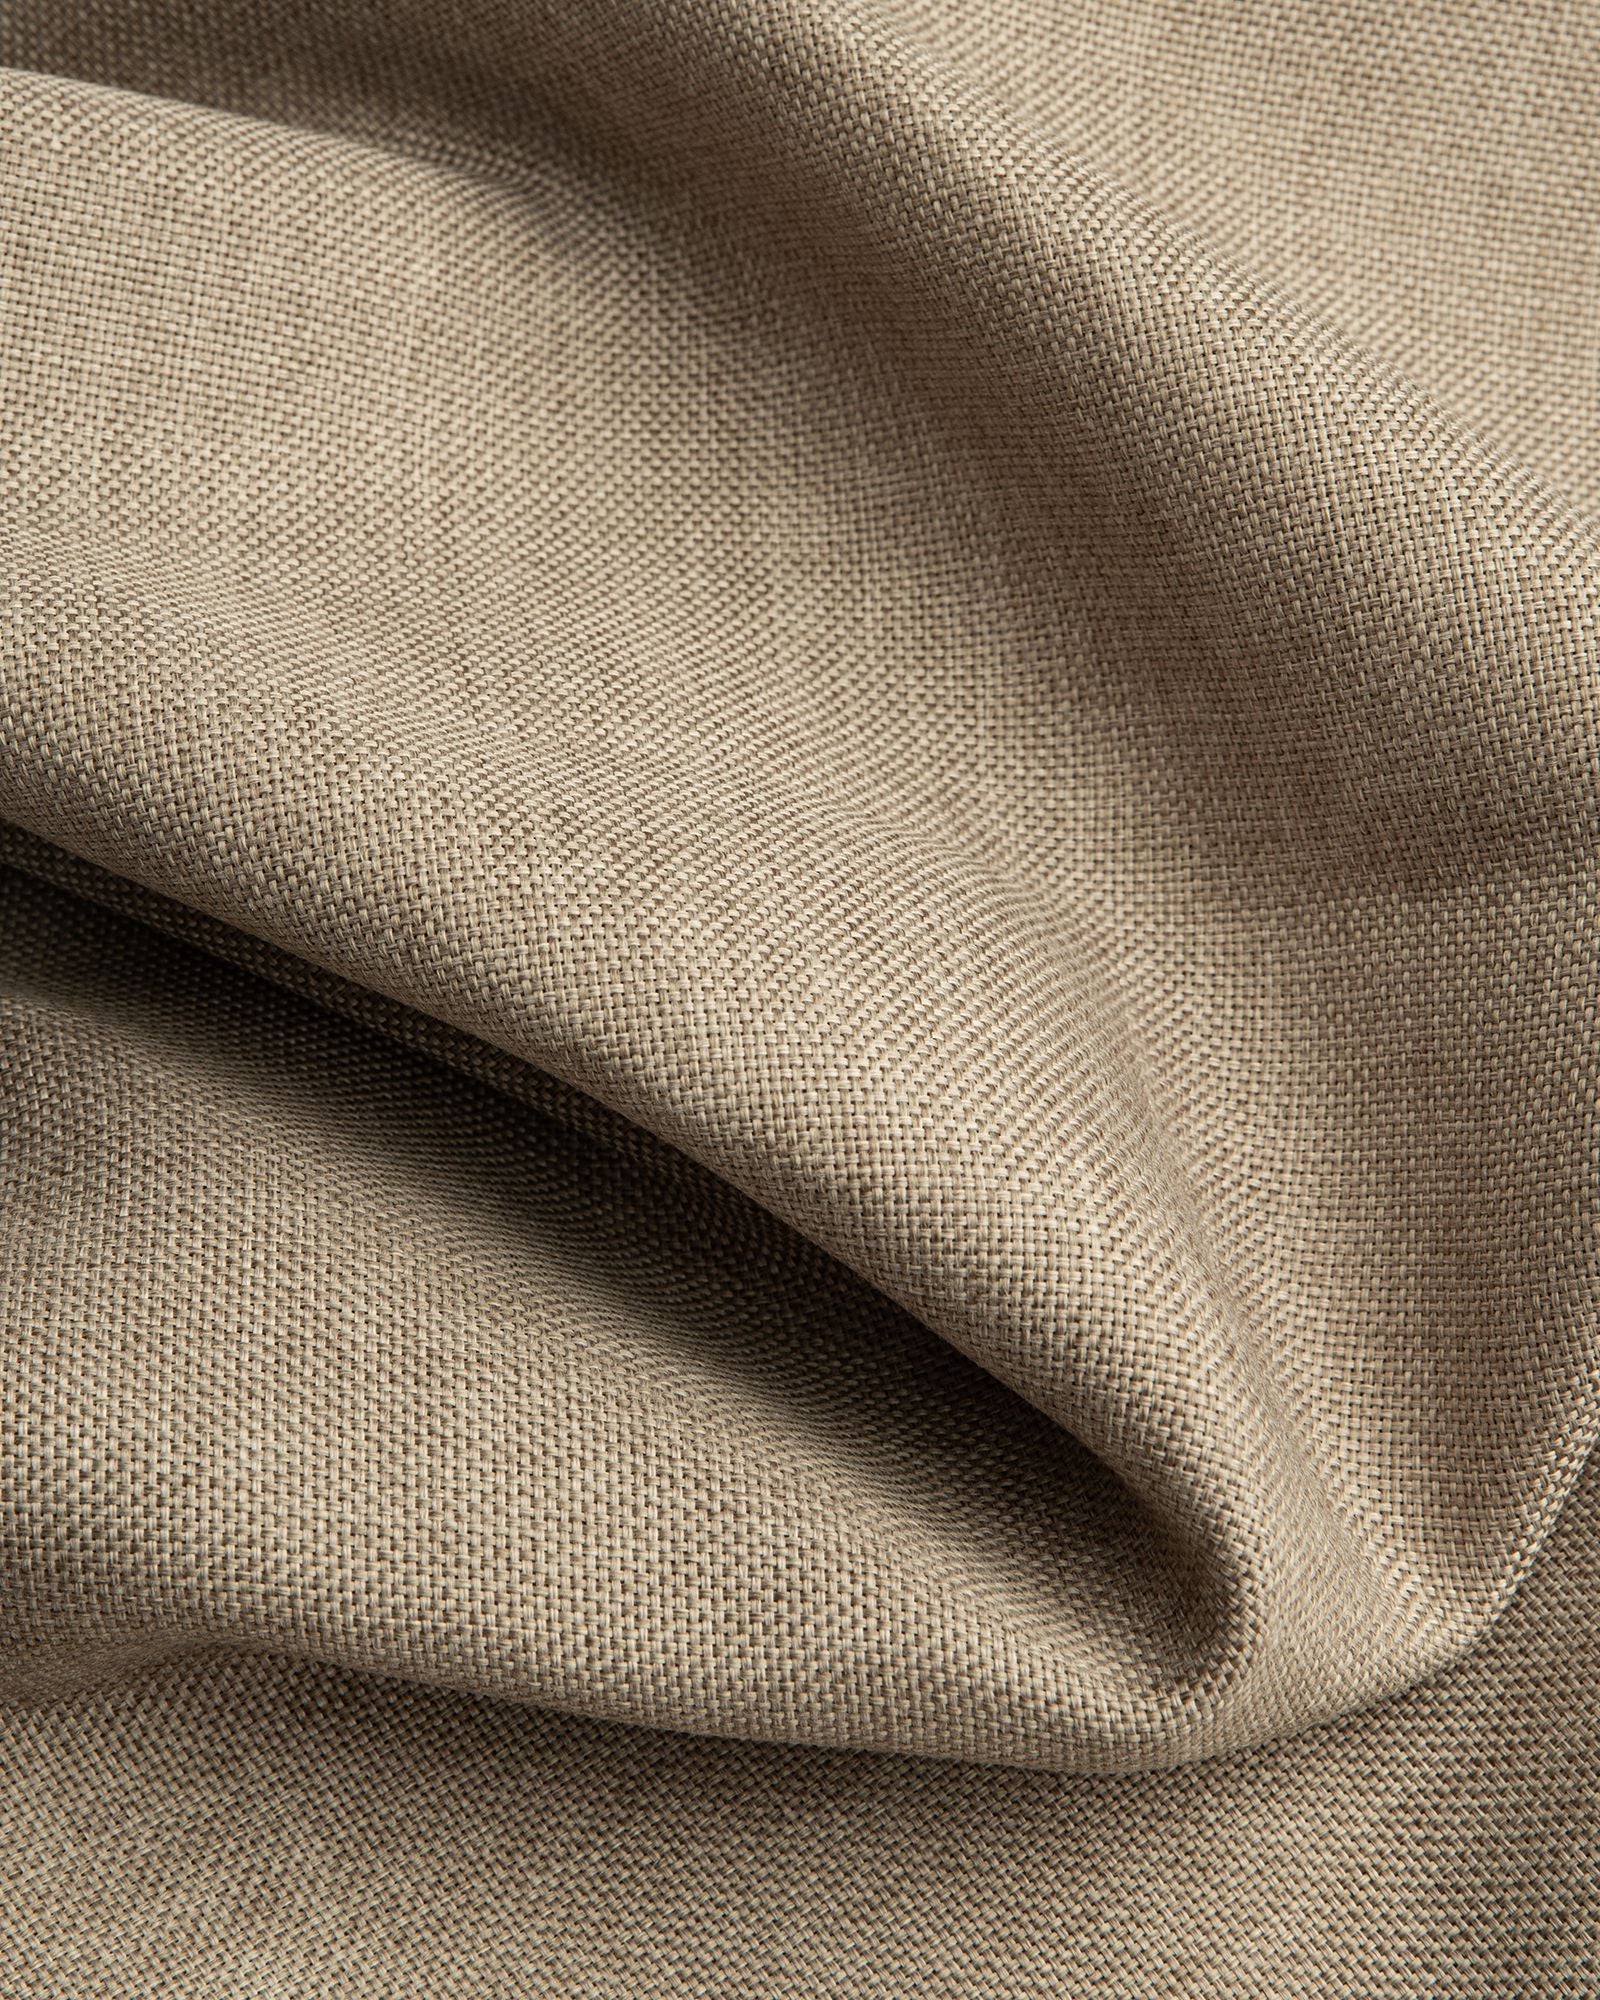 Größe: 130x 170 cm Farbe: taupe #farbe_taupe